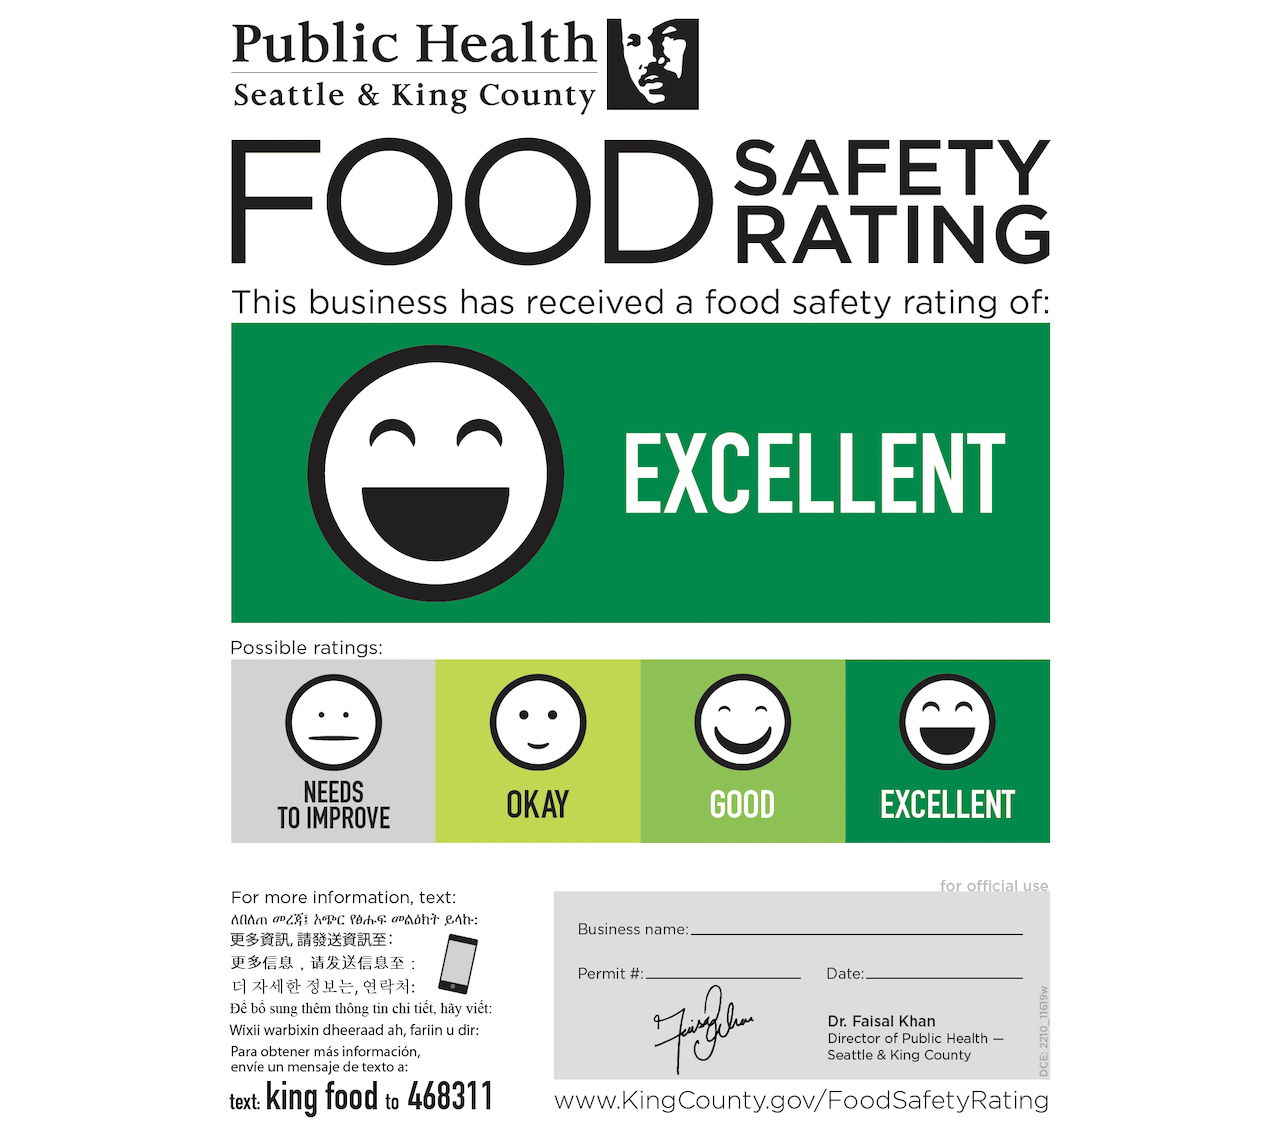 Sample food safety rating poster shown in food establishments in King County